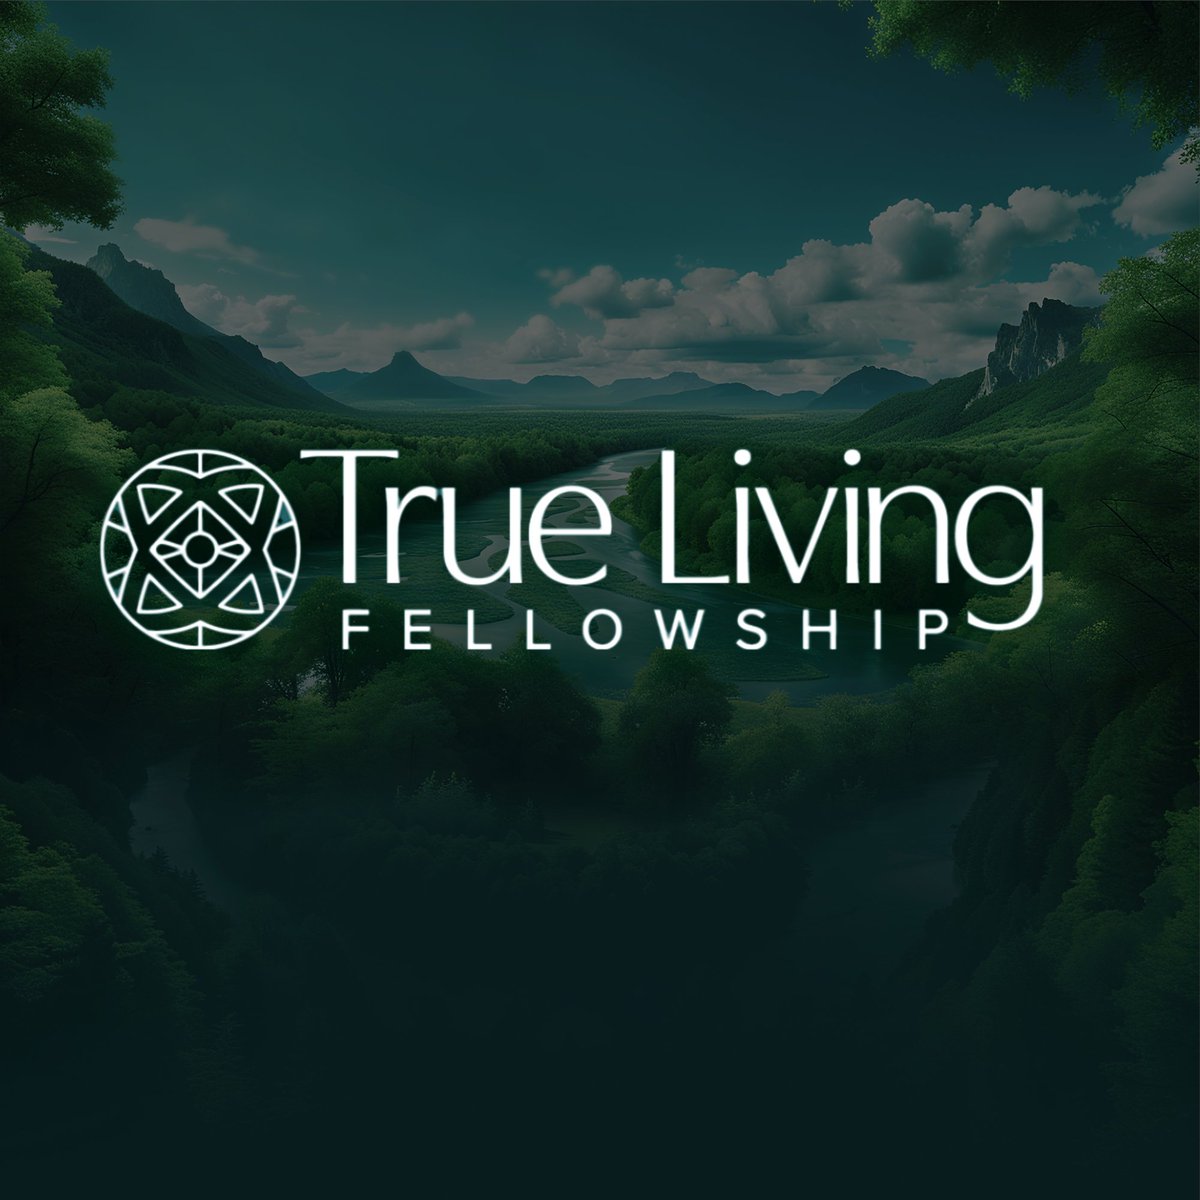 Living by the truth can be a challenging step forward (especially if those close to us are going in the opposite direction), but sometimes it's best to get support from those who are on the same path. That's why I created the True Living Fellowship: offerings.andrewkaufmanmd.com/true-living-fe…